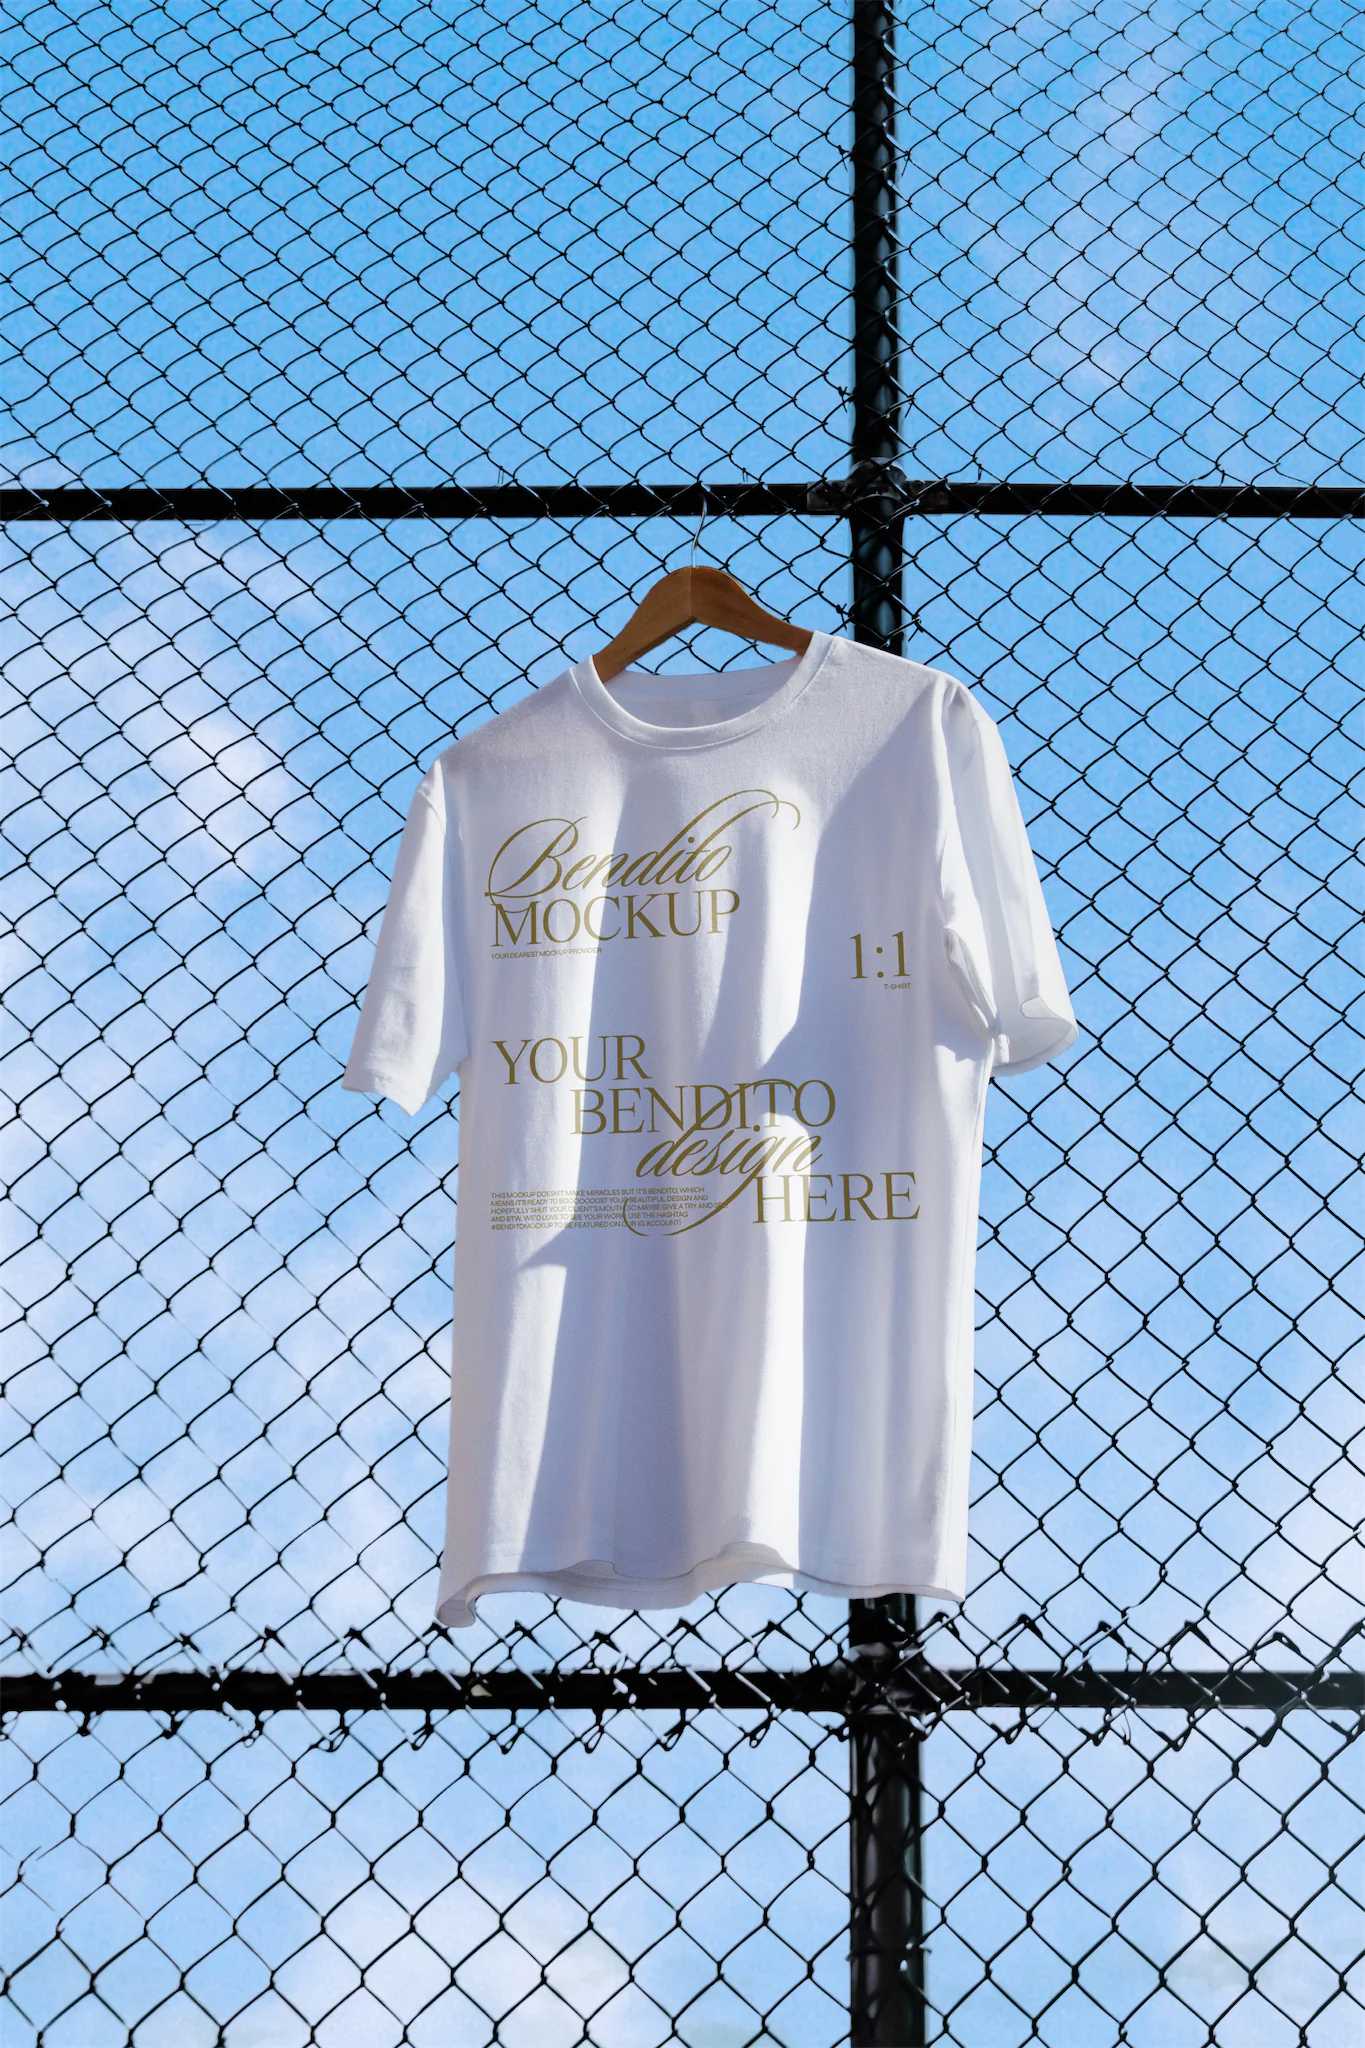 T-shirt mockup freebie with sky background with clouds.